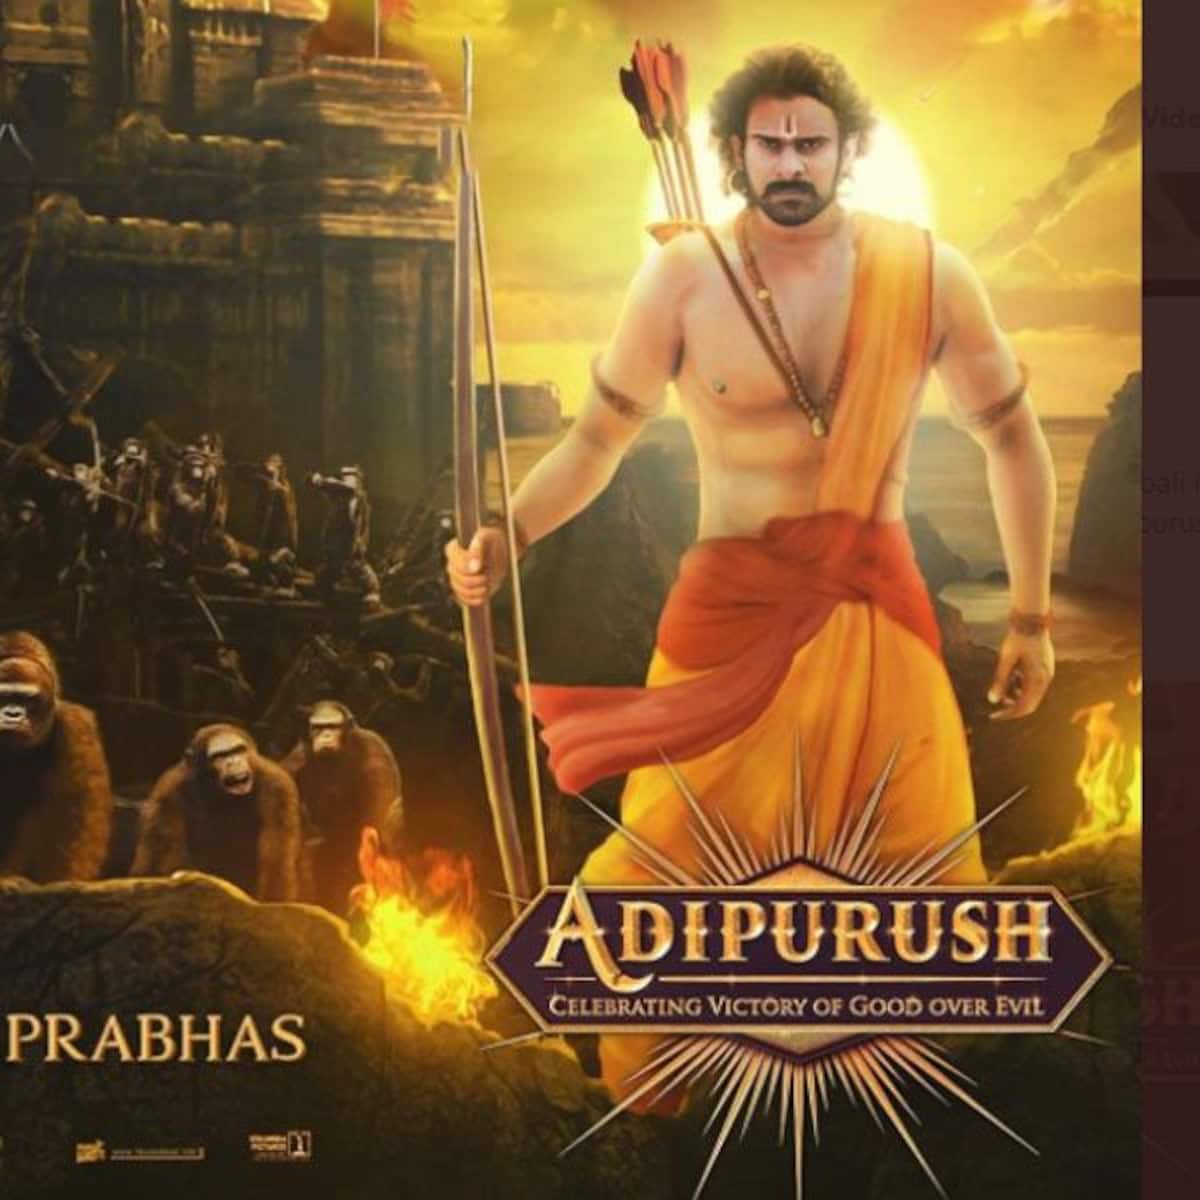 Adipurush: The release date of the teaser of Adipurush revealed, the first look of the film will be released on this day in the city of Lord Ram